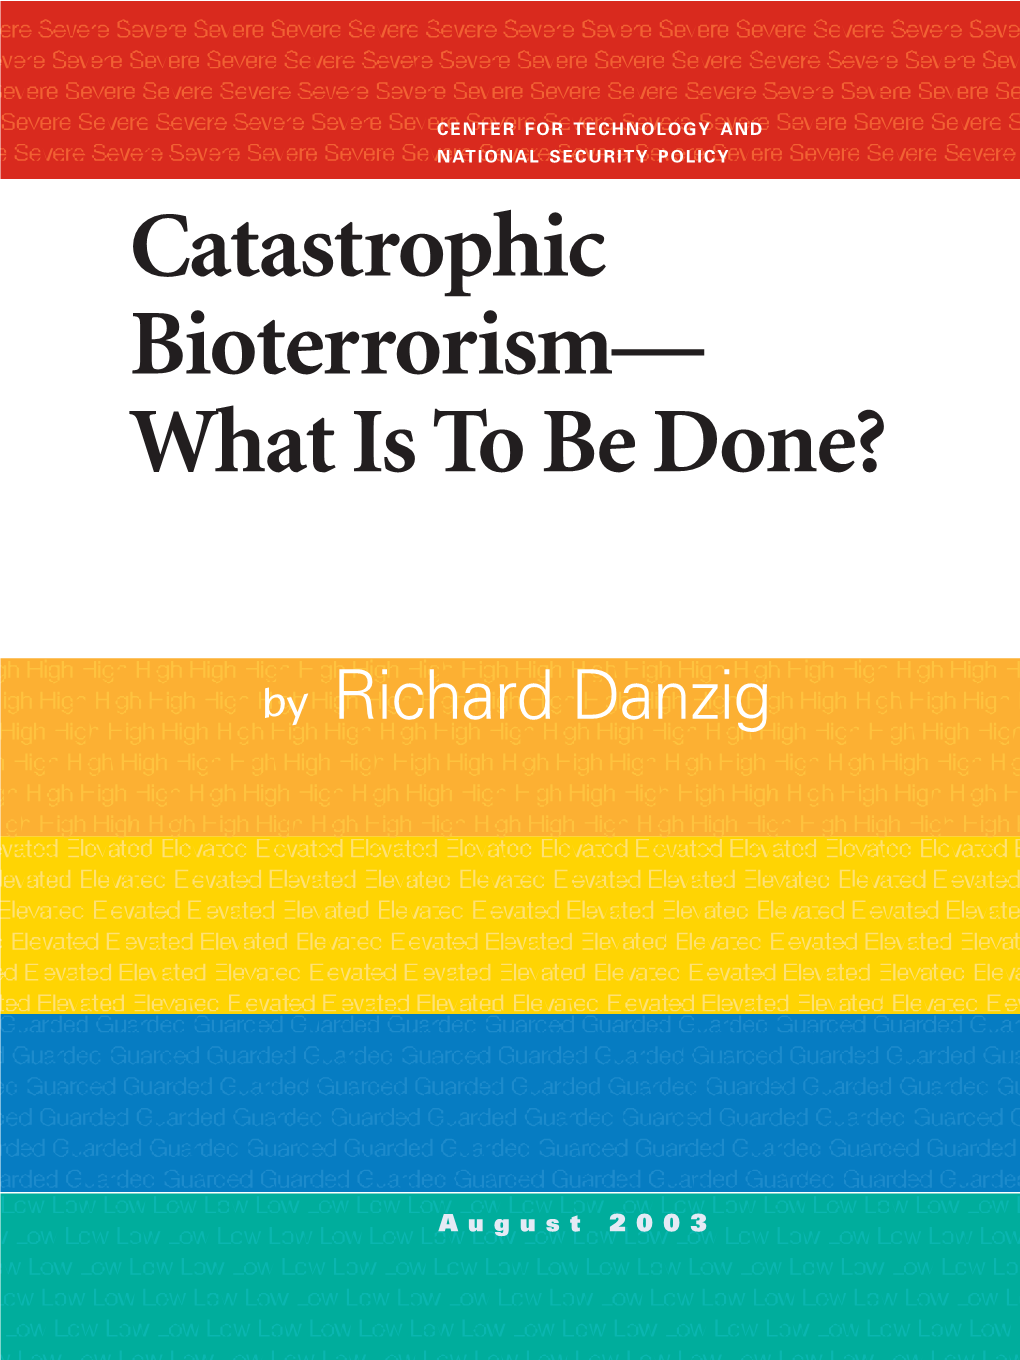 Catastrophic Bioterrorism— What Is to Be Done?